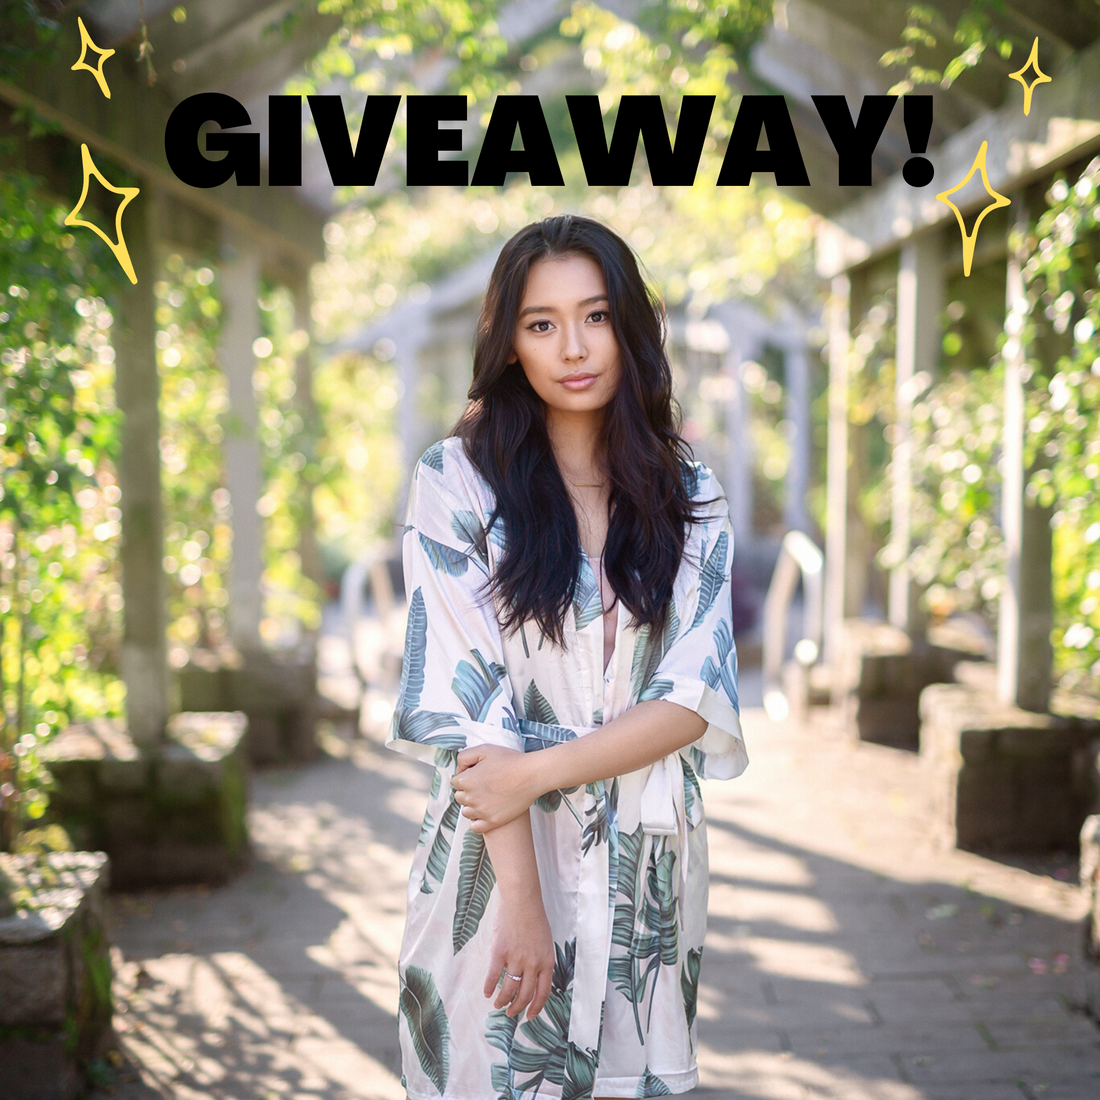 It's GIVEAWAY time!